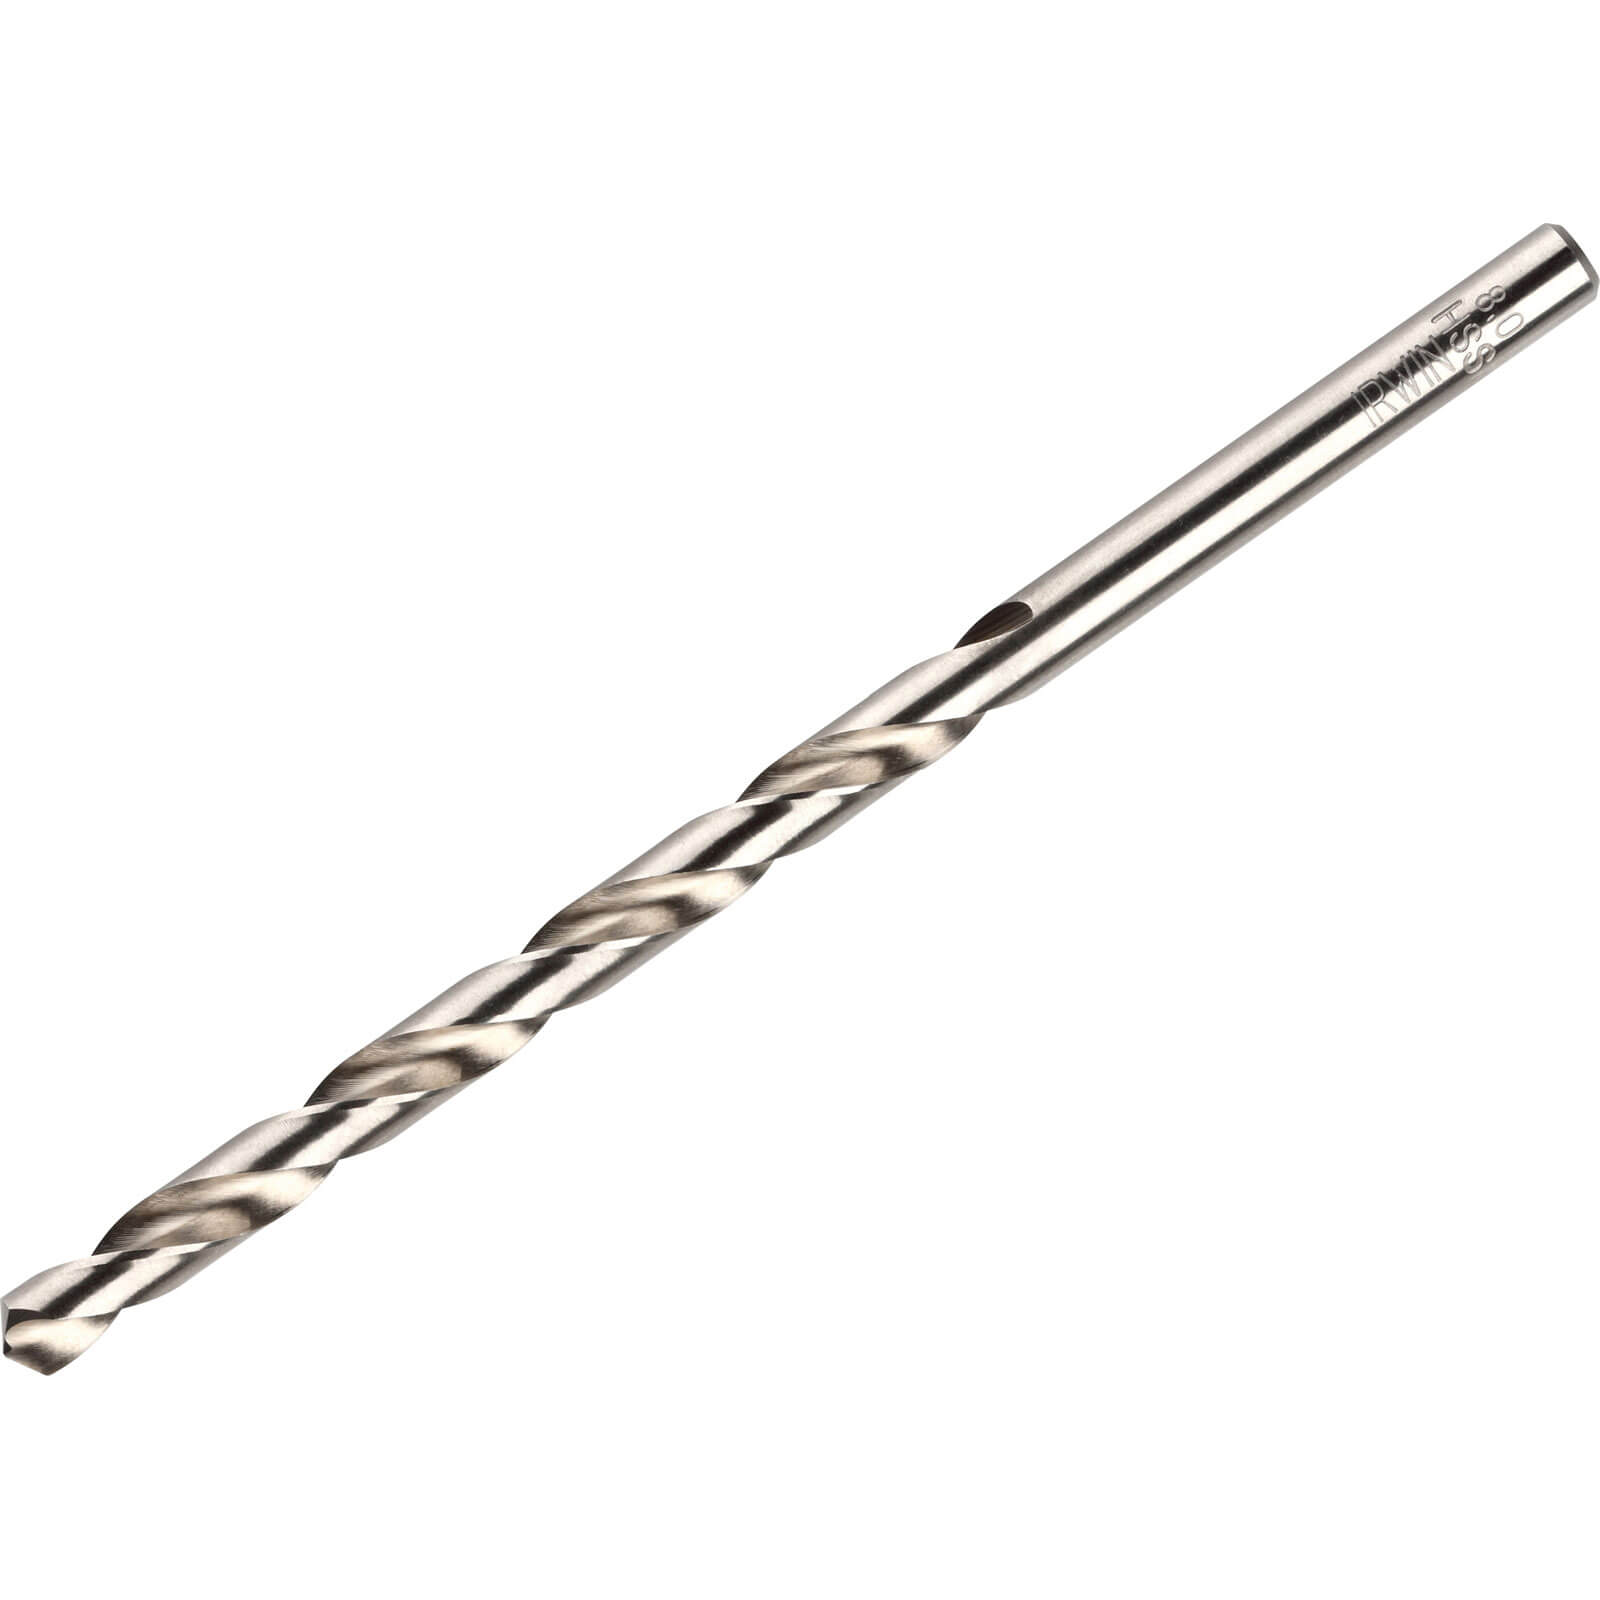 Photo of Irwin Hss Pro Drill Bits 8.5mm Pack Of 5